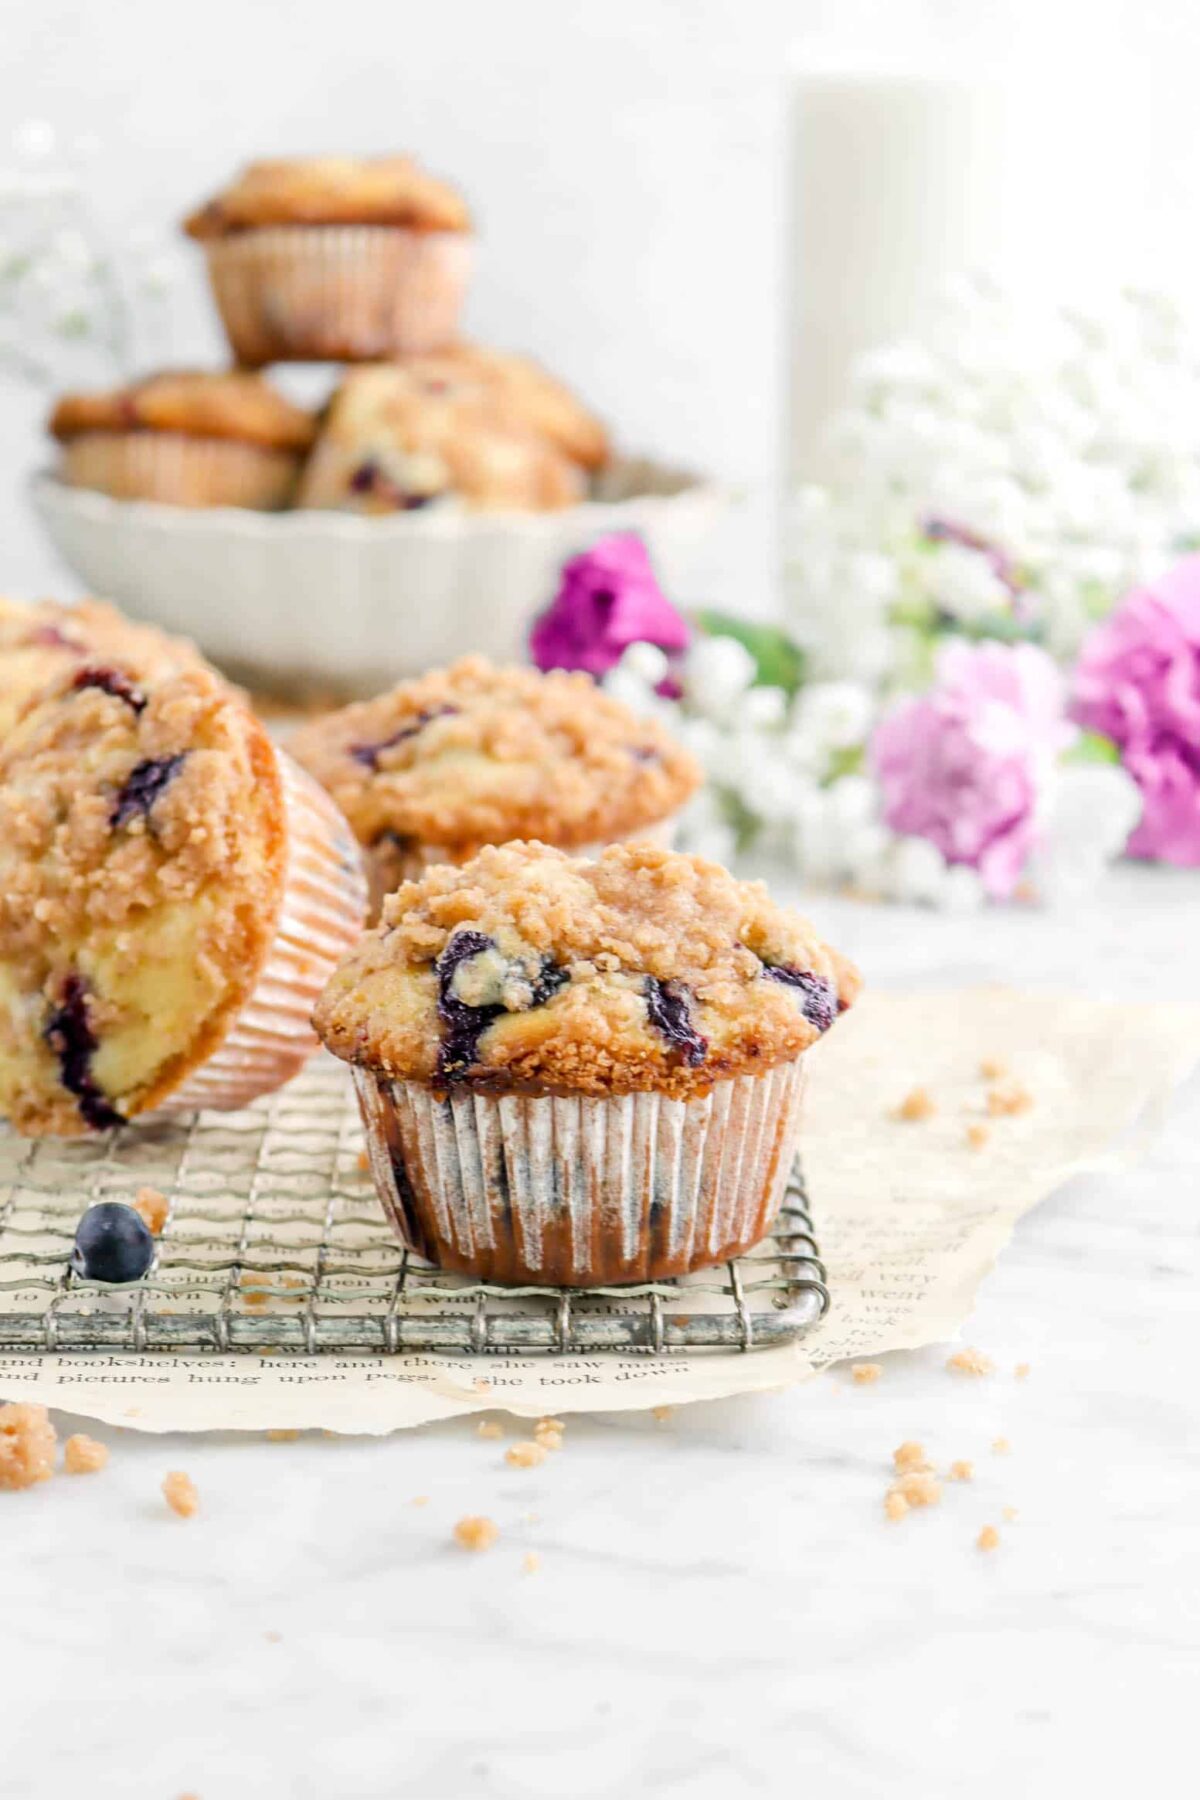 blueberry muffins on wire cooling rack with flowers and more muffins behind